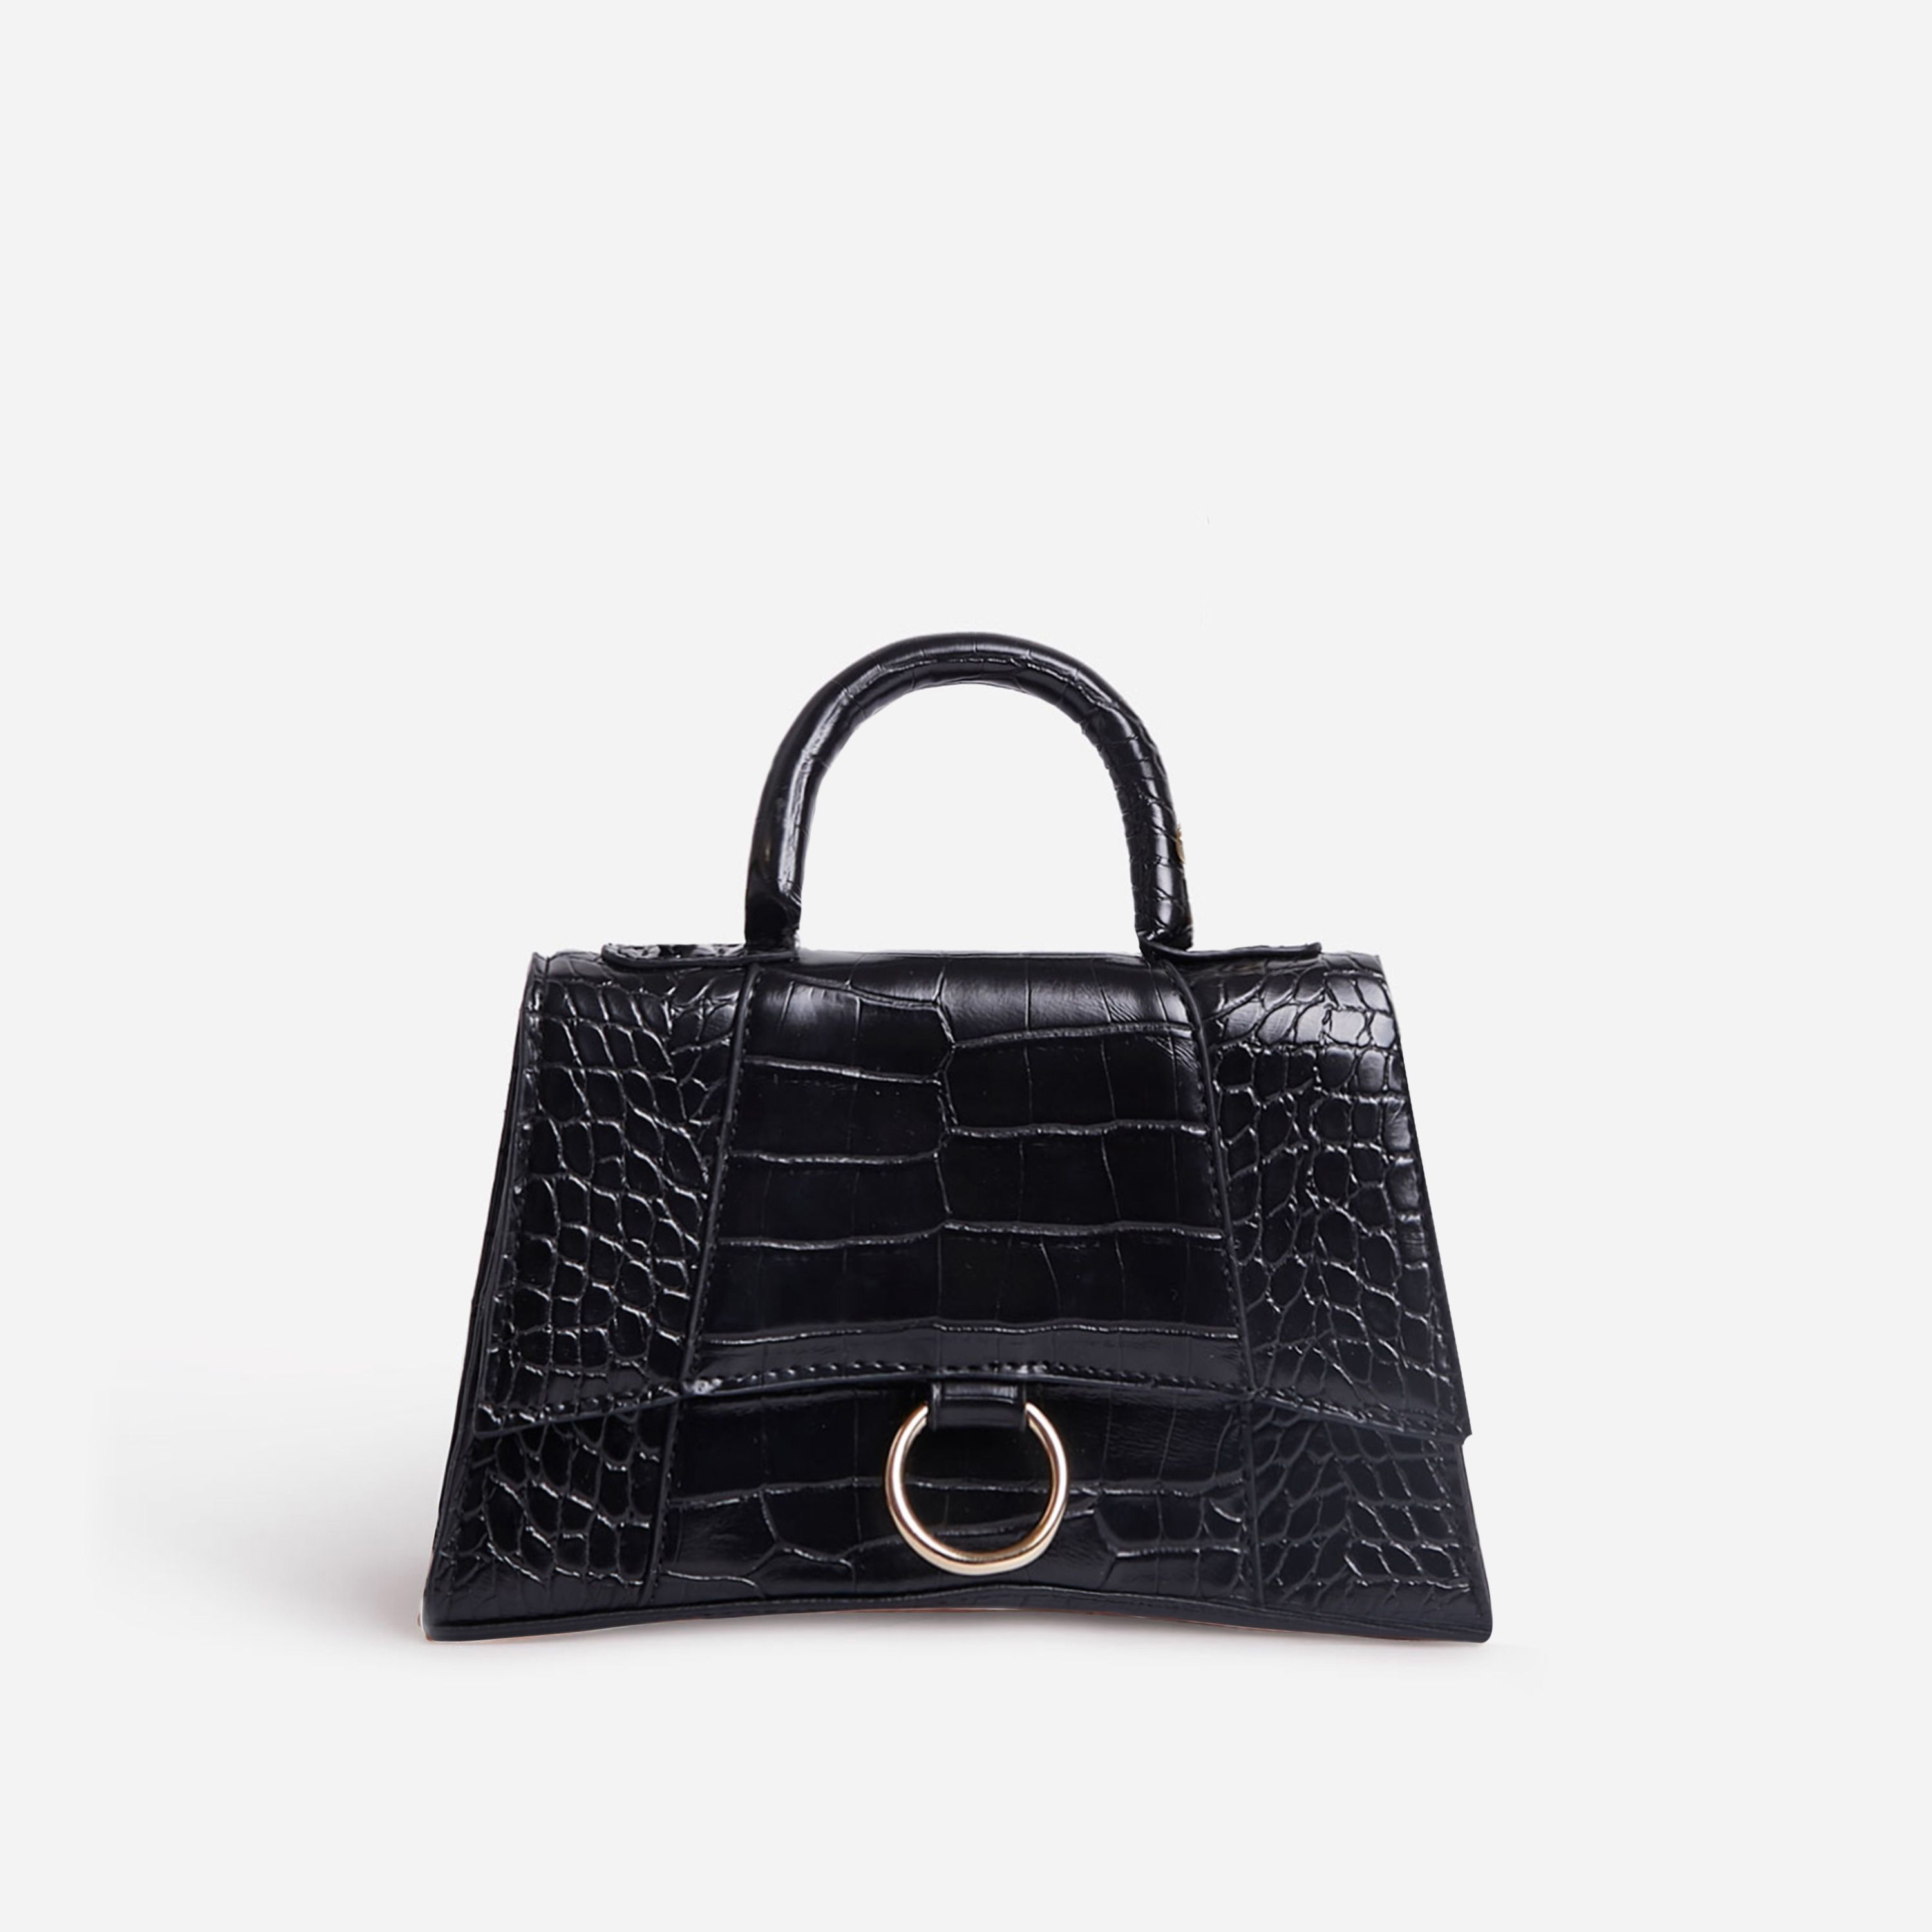 Balenciaga hourglass bag dupes from £15 - SURGEOFSTYLE by Benita